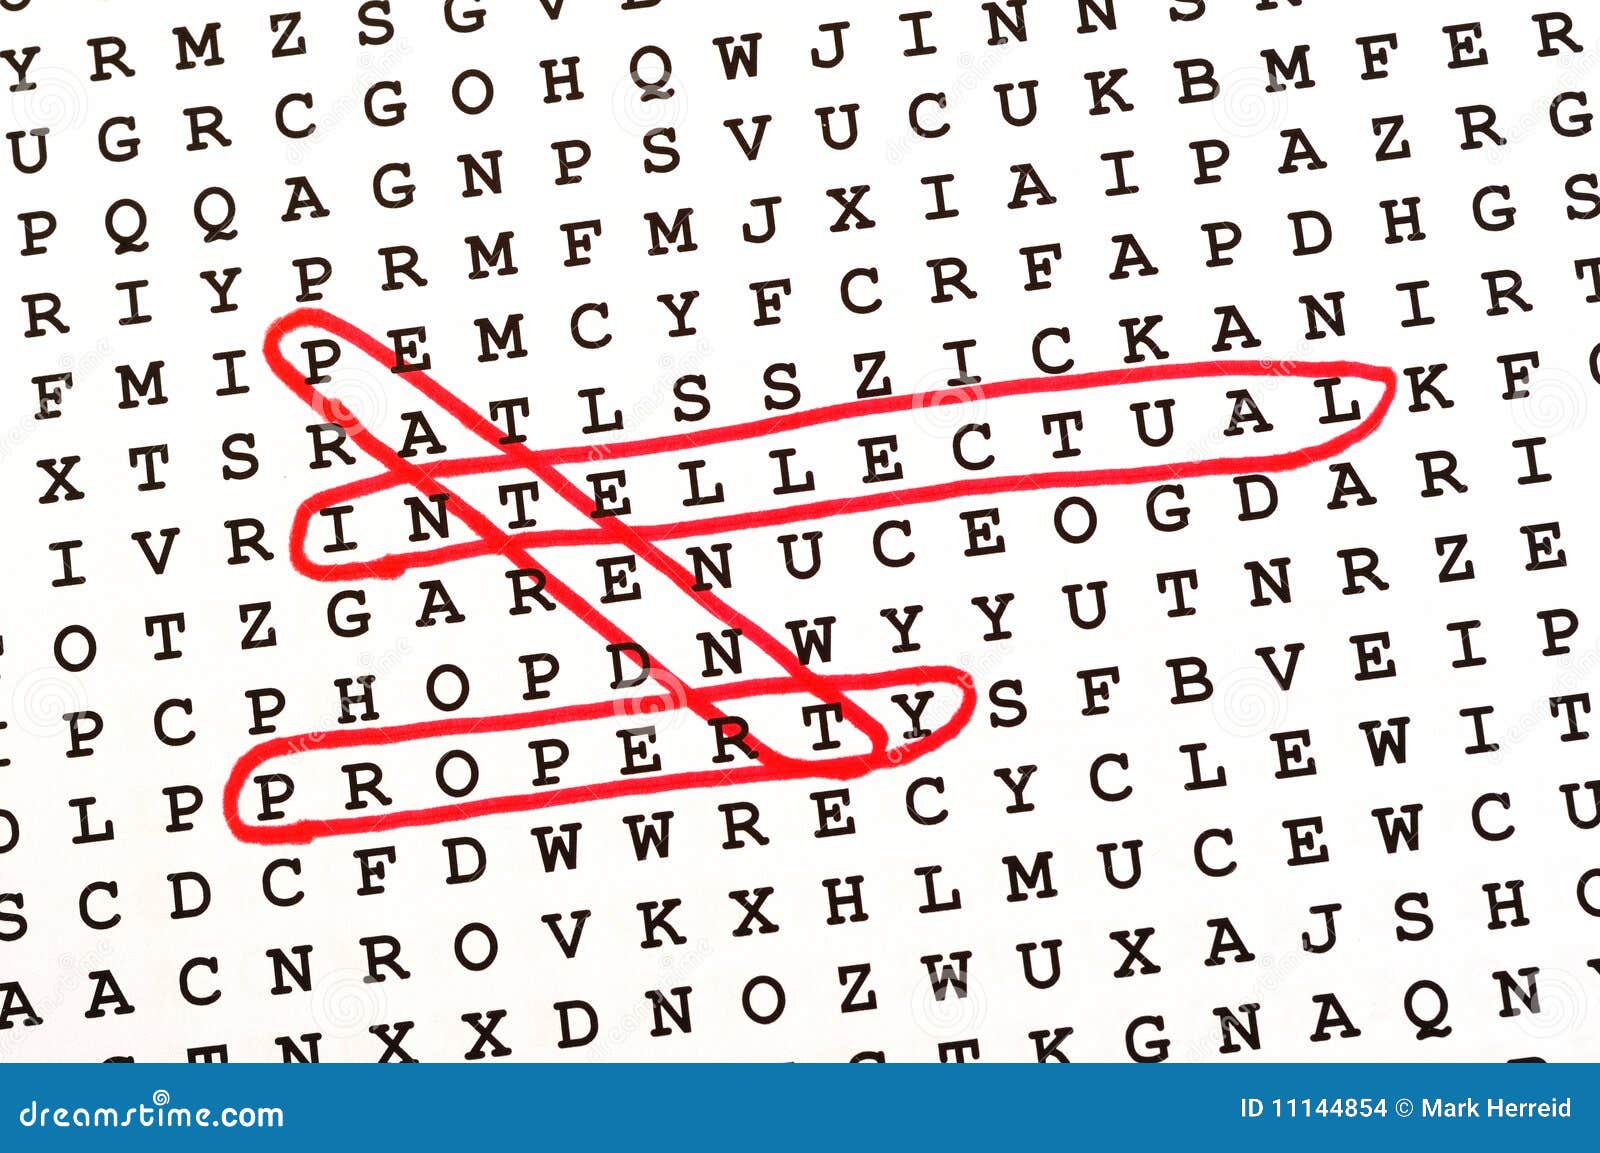 intellectual property, patent word search puzzle